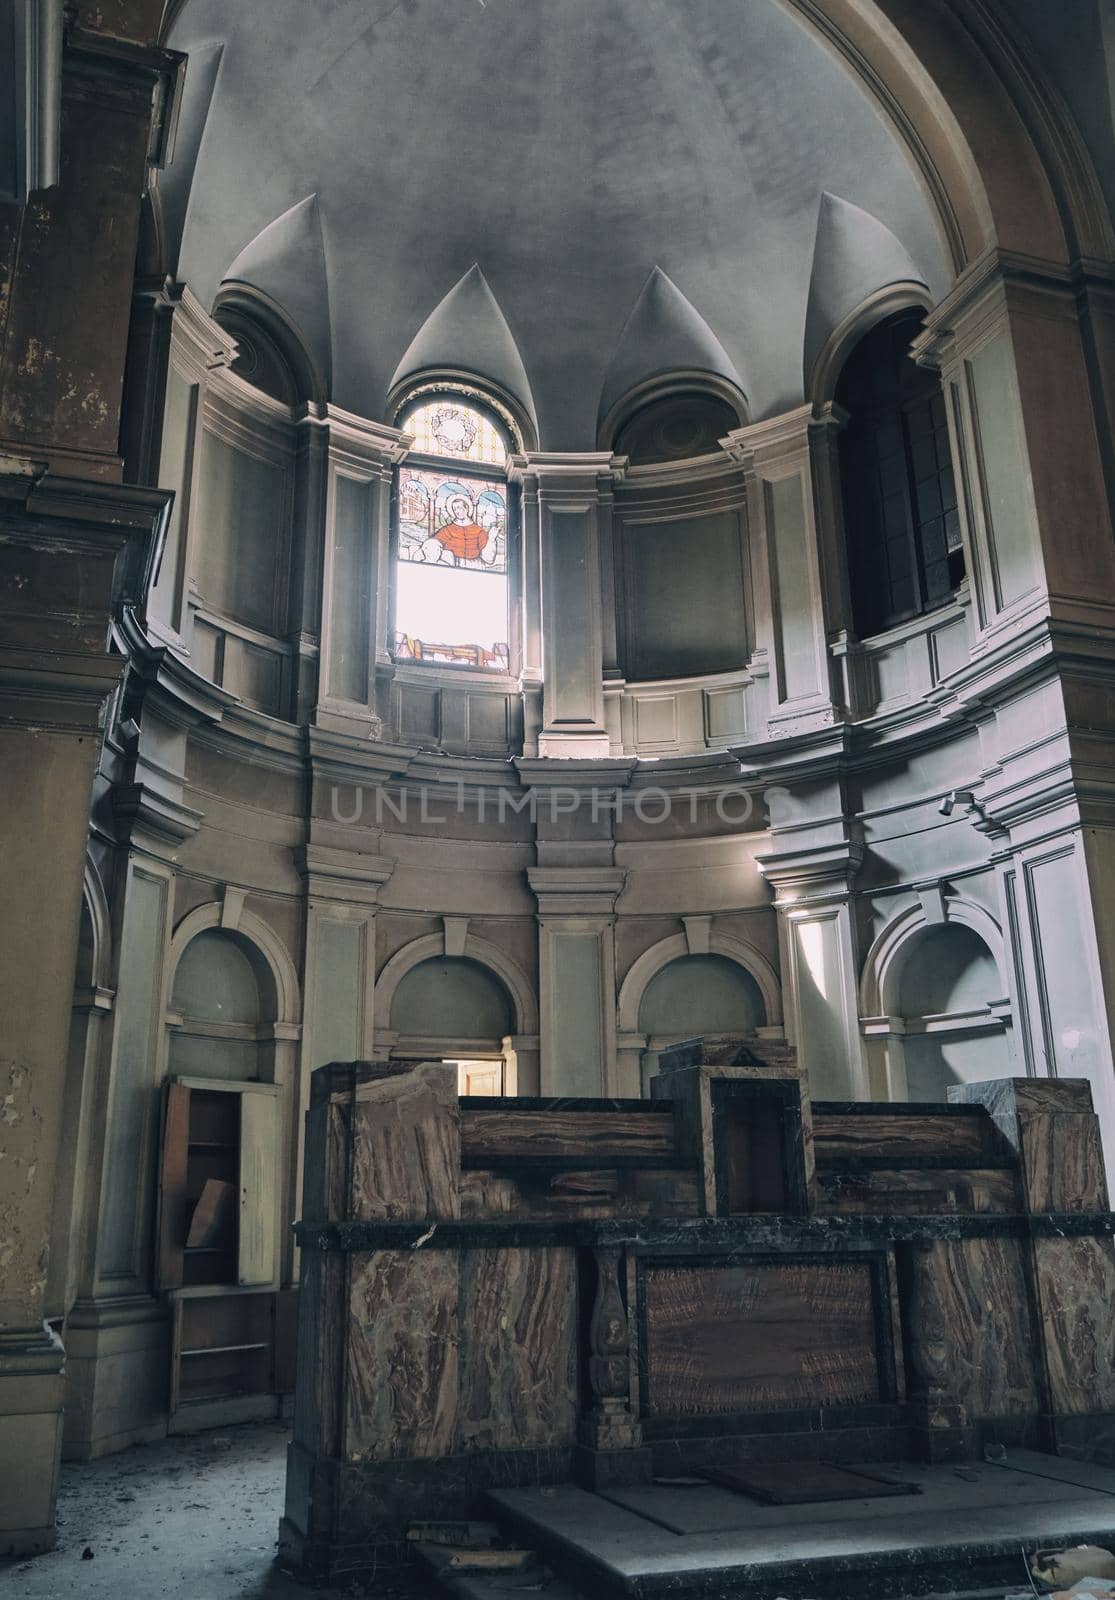 abandoned church. Interior architecture of old building